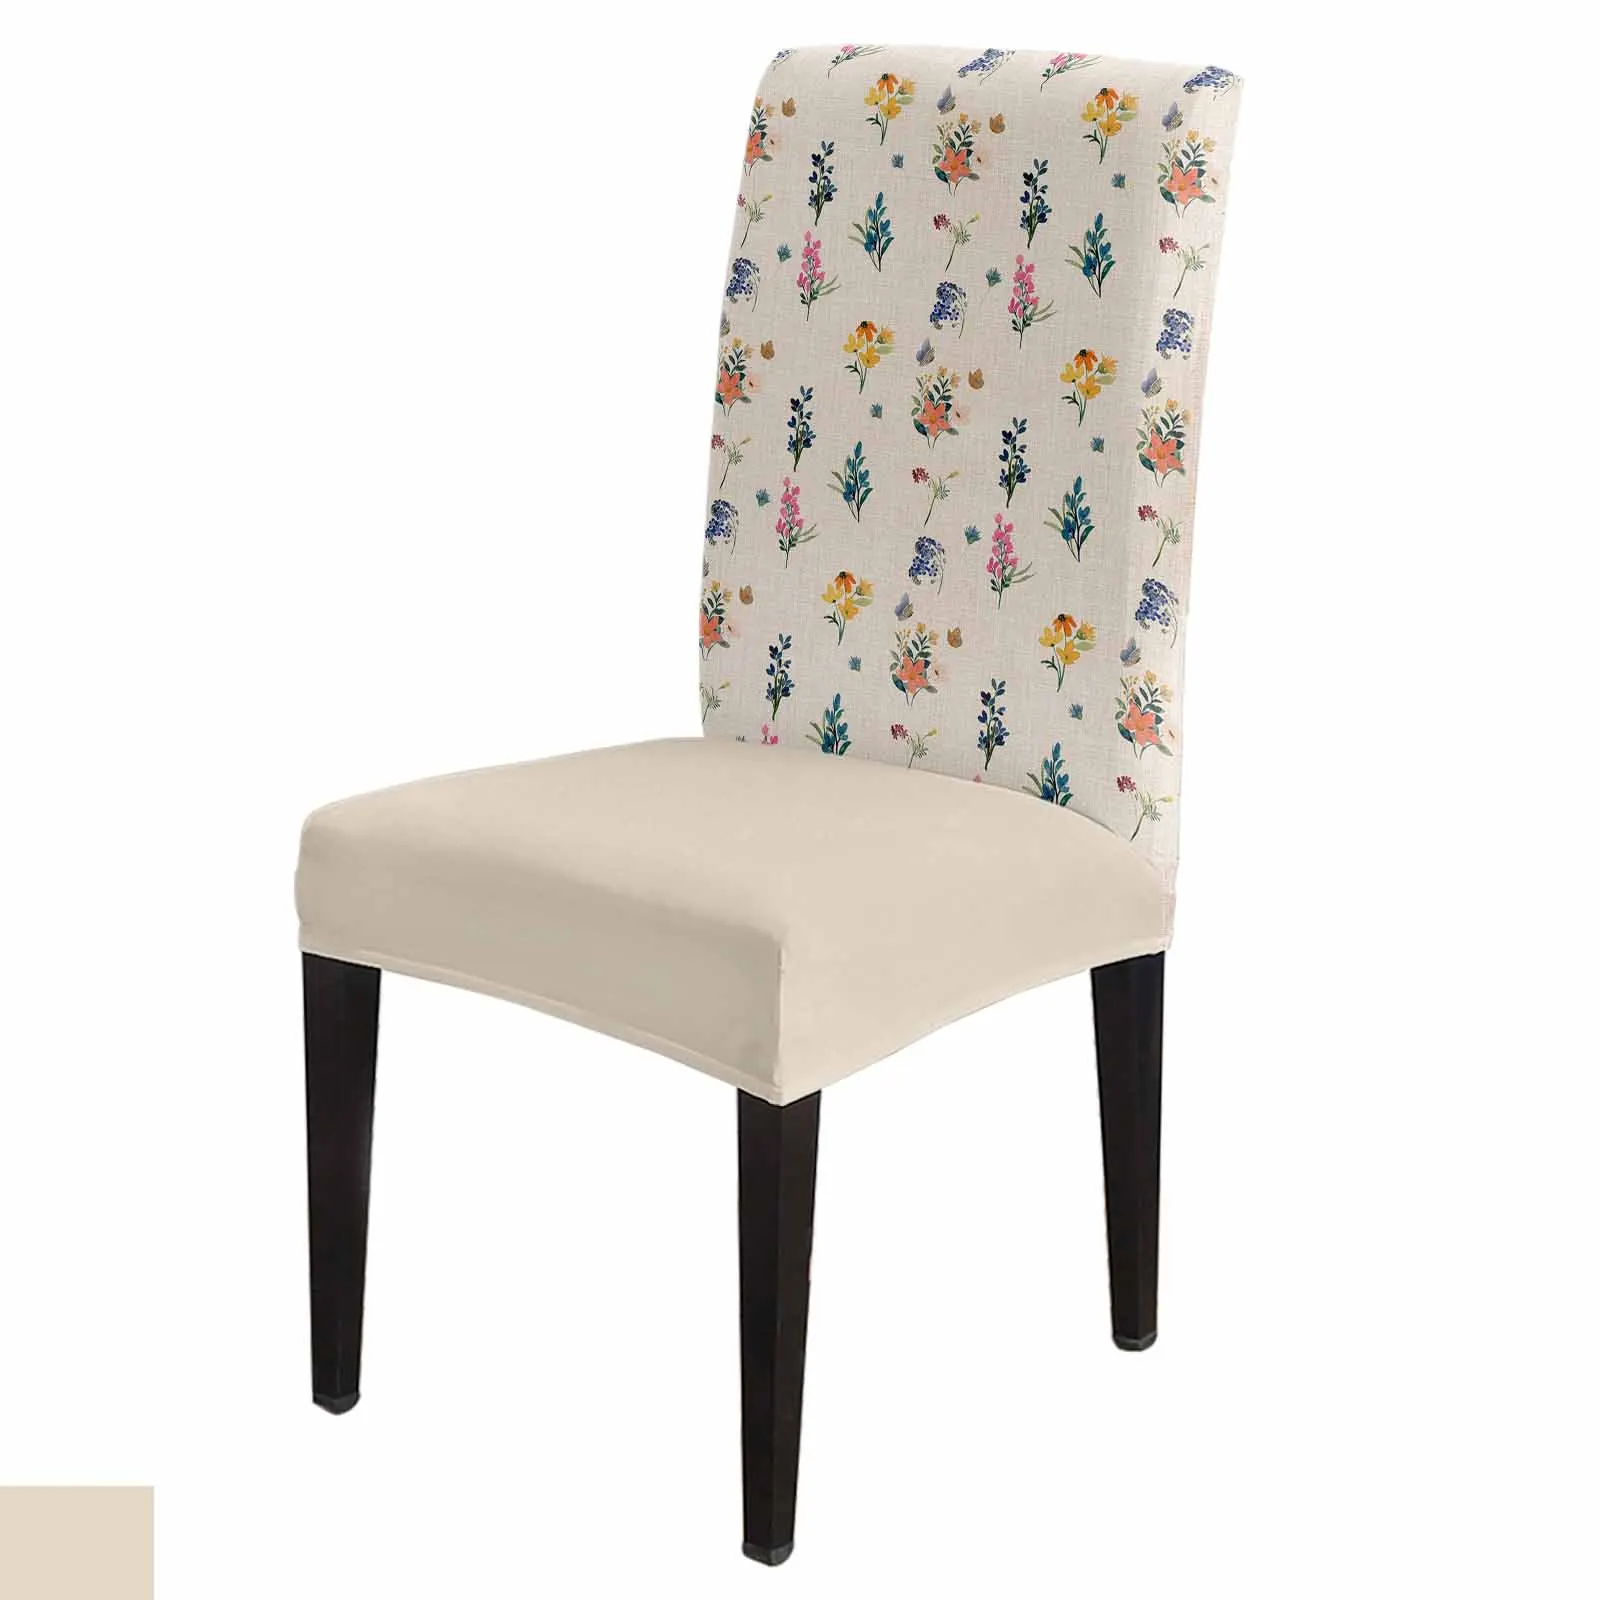 

Daisy Flower Lavender Butterfly Chair Cover Stretch Elastic Dining Room Chair Slipcover Spandex Case for Office Chair